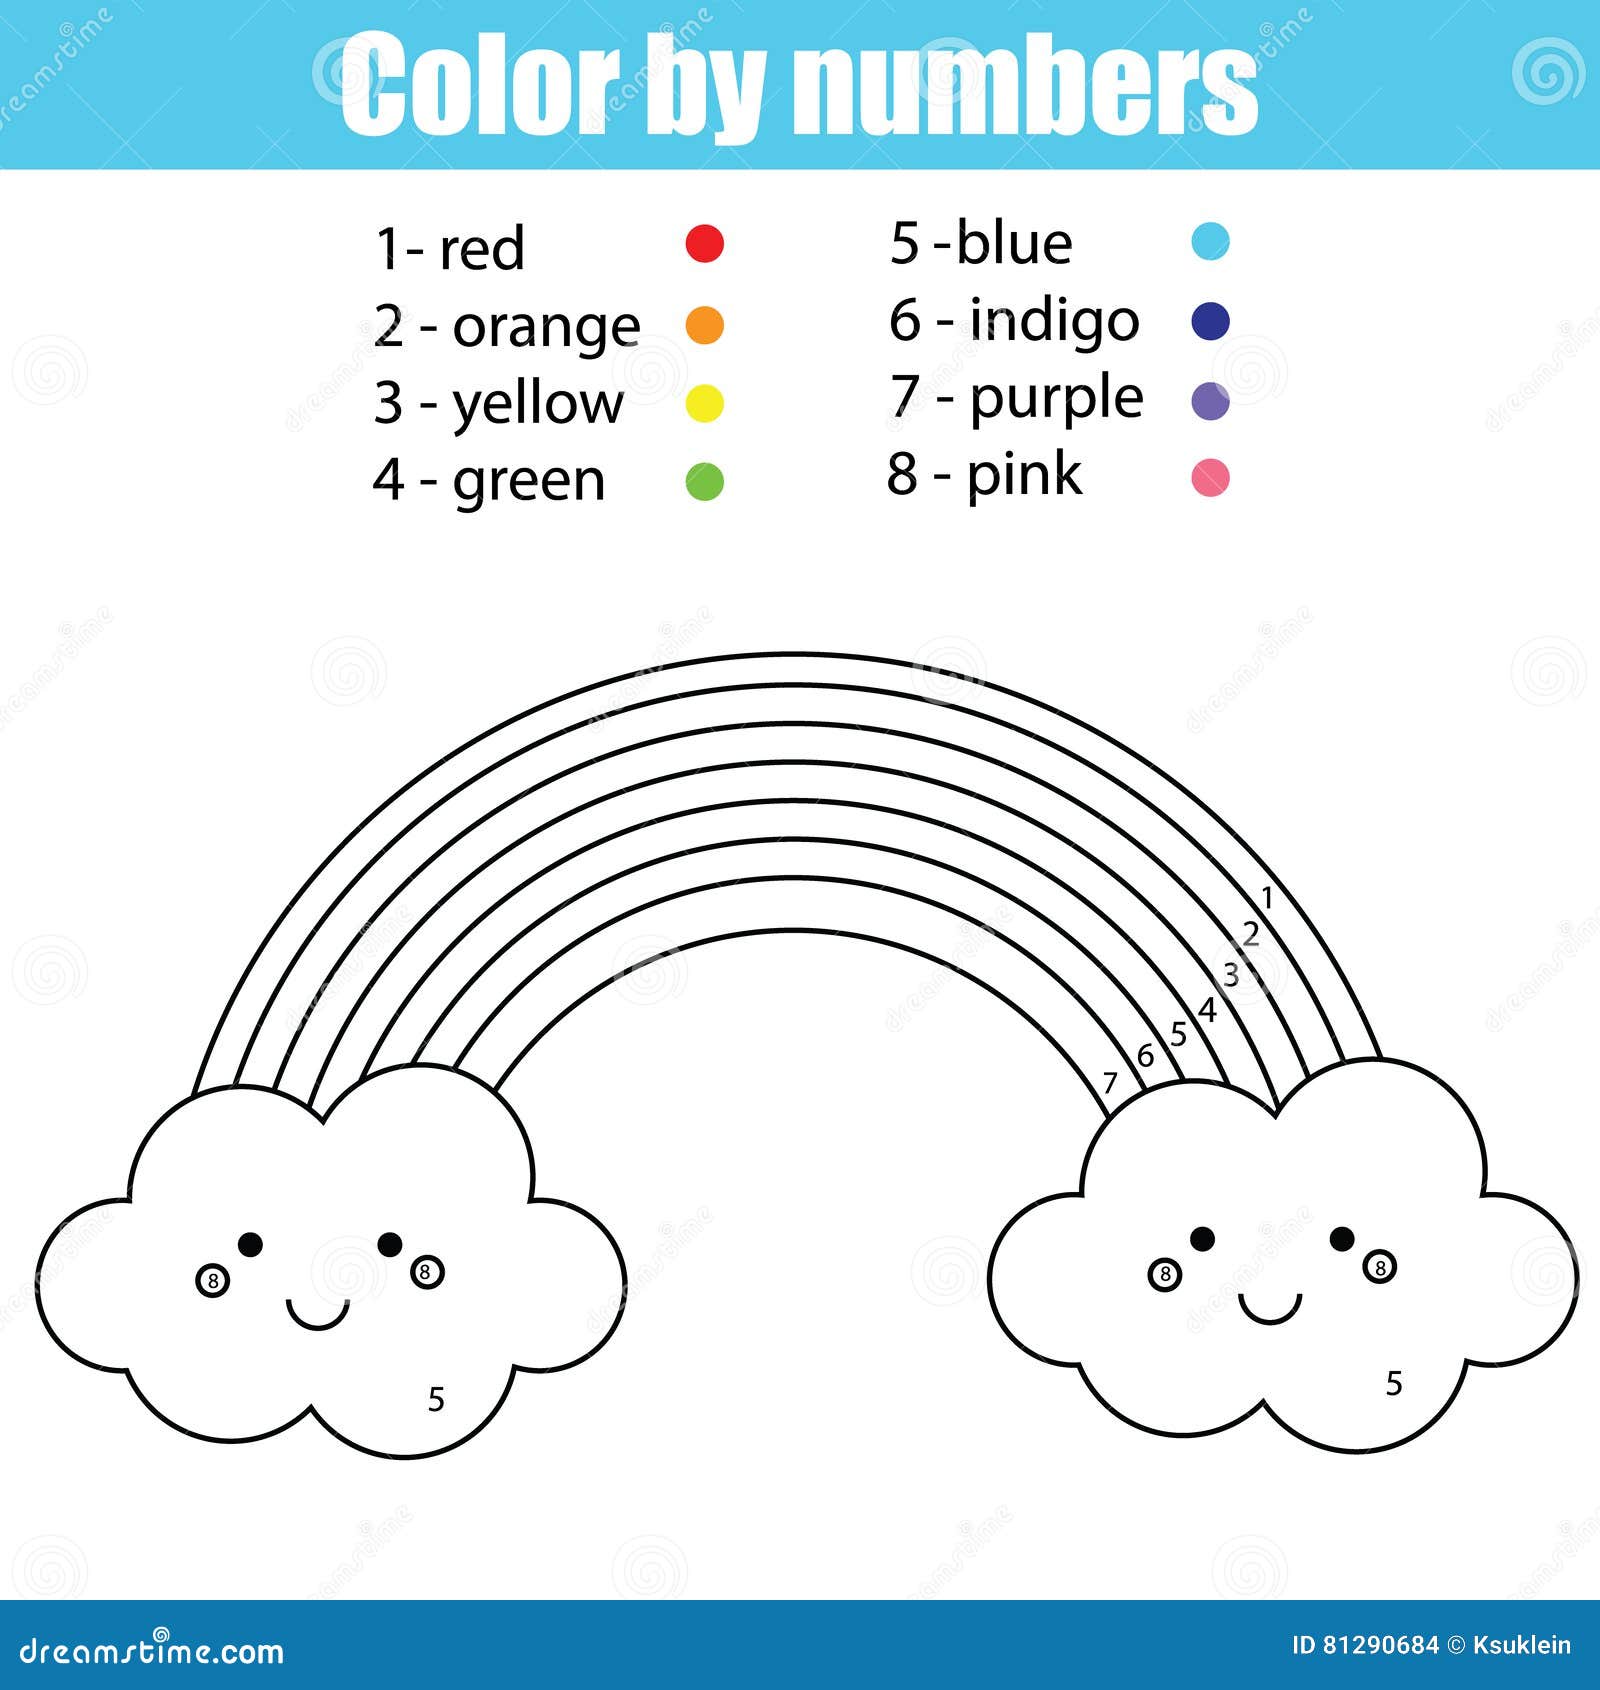 coloring-page-with-cute-kawaii-rainbow-color-by-numbers-stock-vector-illustration-of